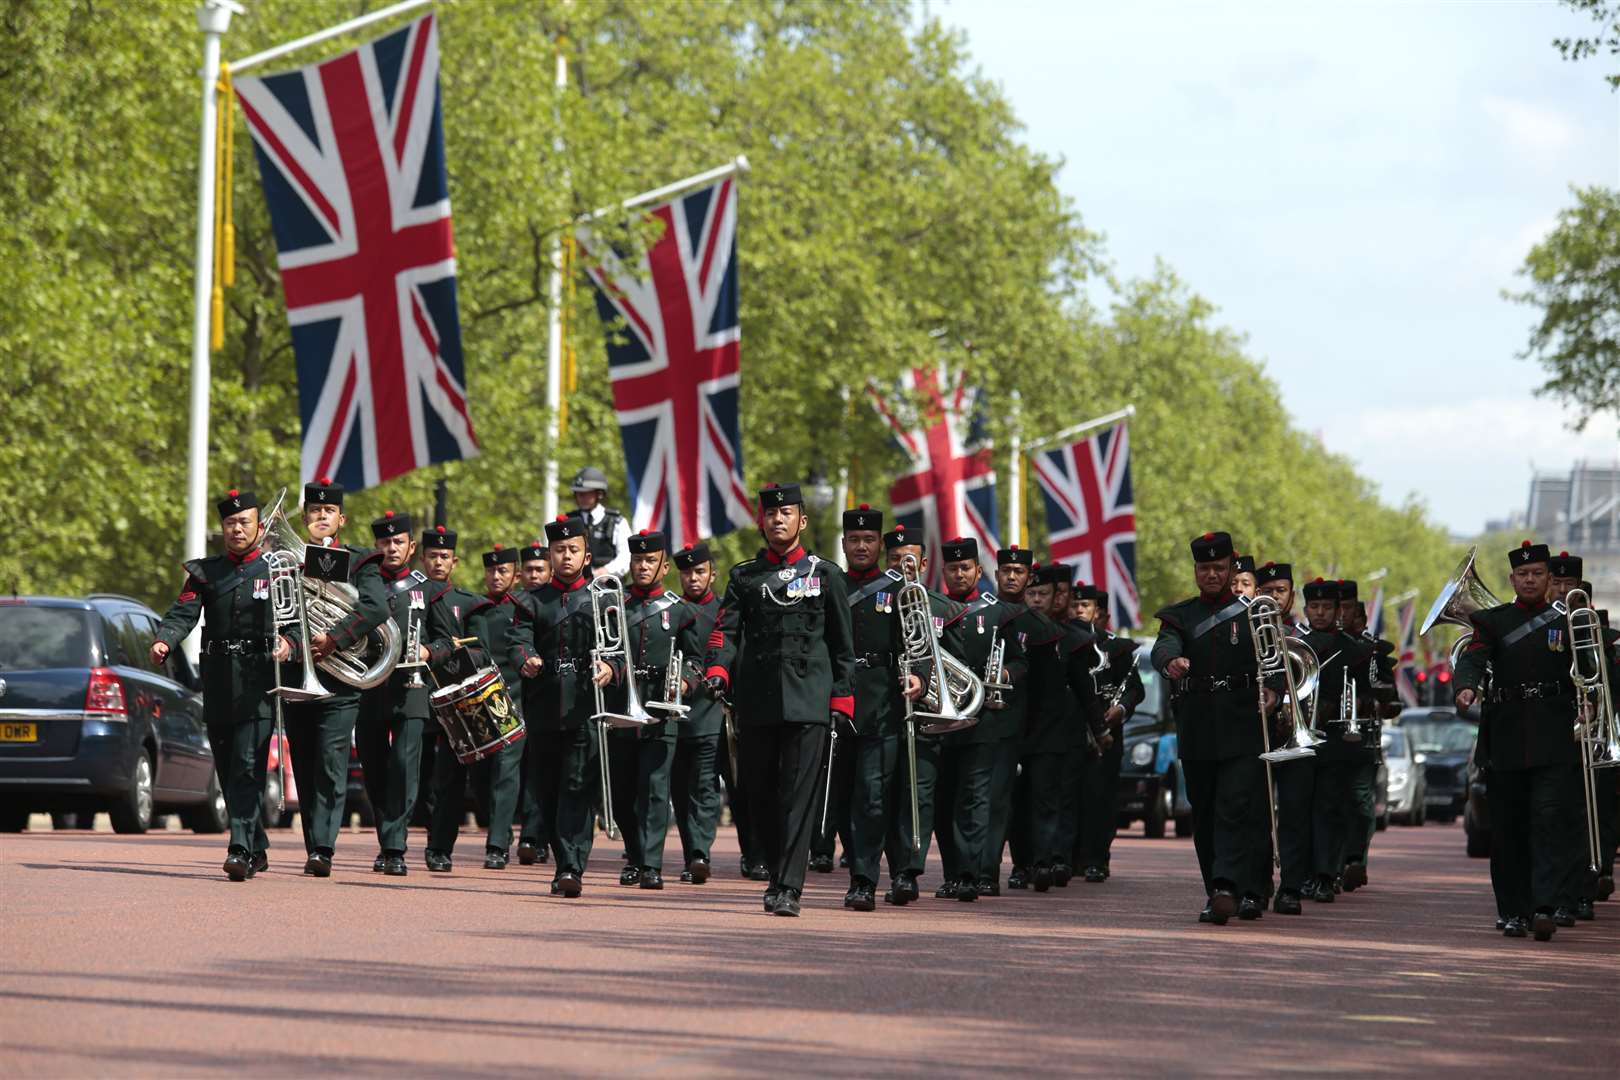 The Band of the Brigade of Gurkhas march up the Mall towards Buckingham Palace. Picture: Martin Apps